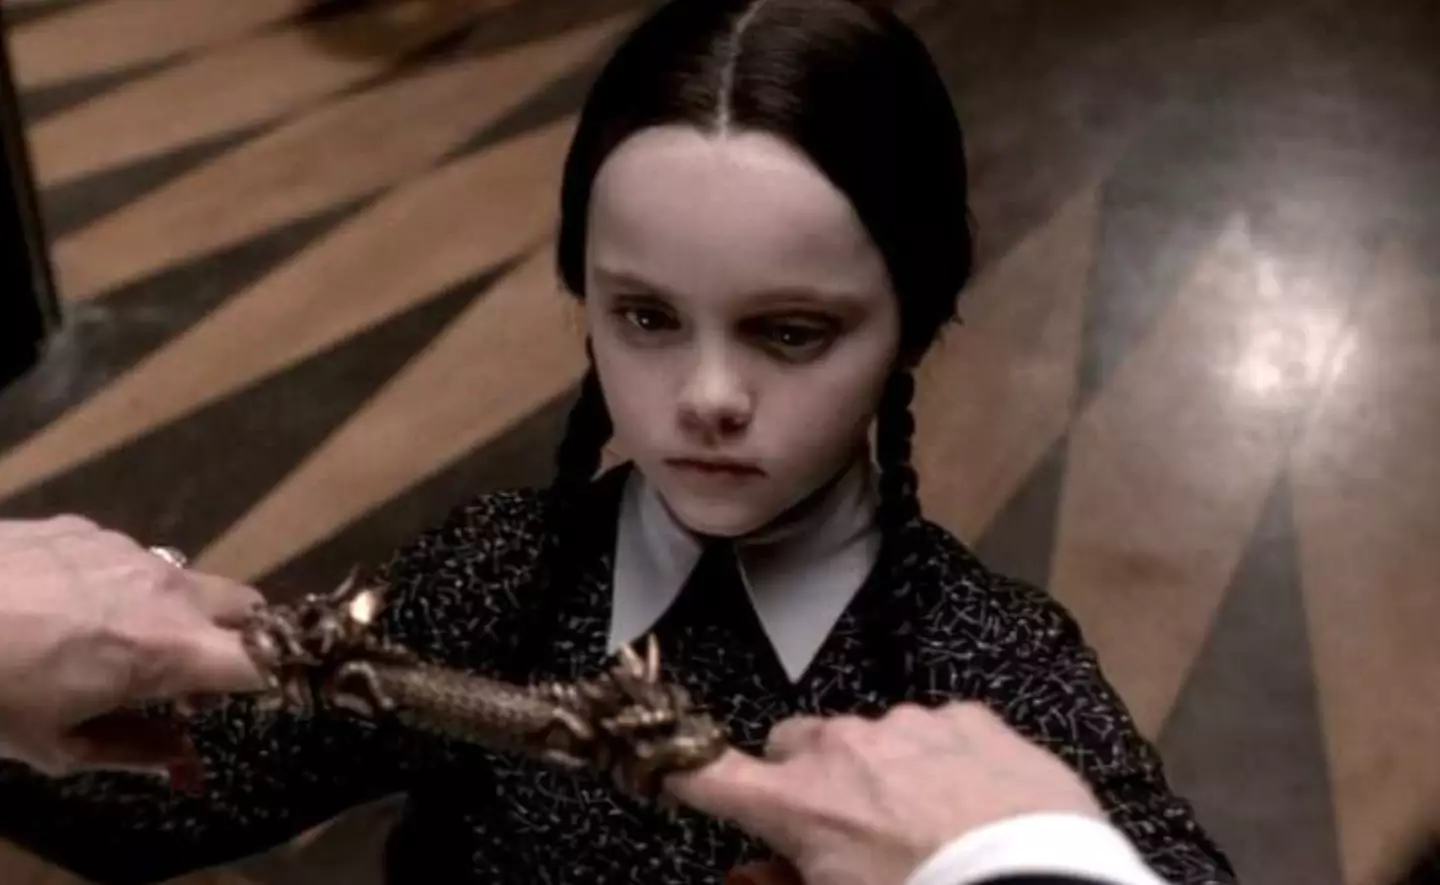 Fans can't get enough of Christina Ricci a.k.a the 1991 Wednesday Addams appearing in 'Wednesday'.